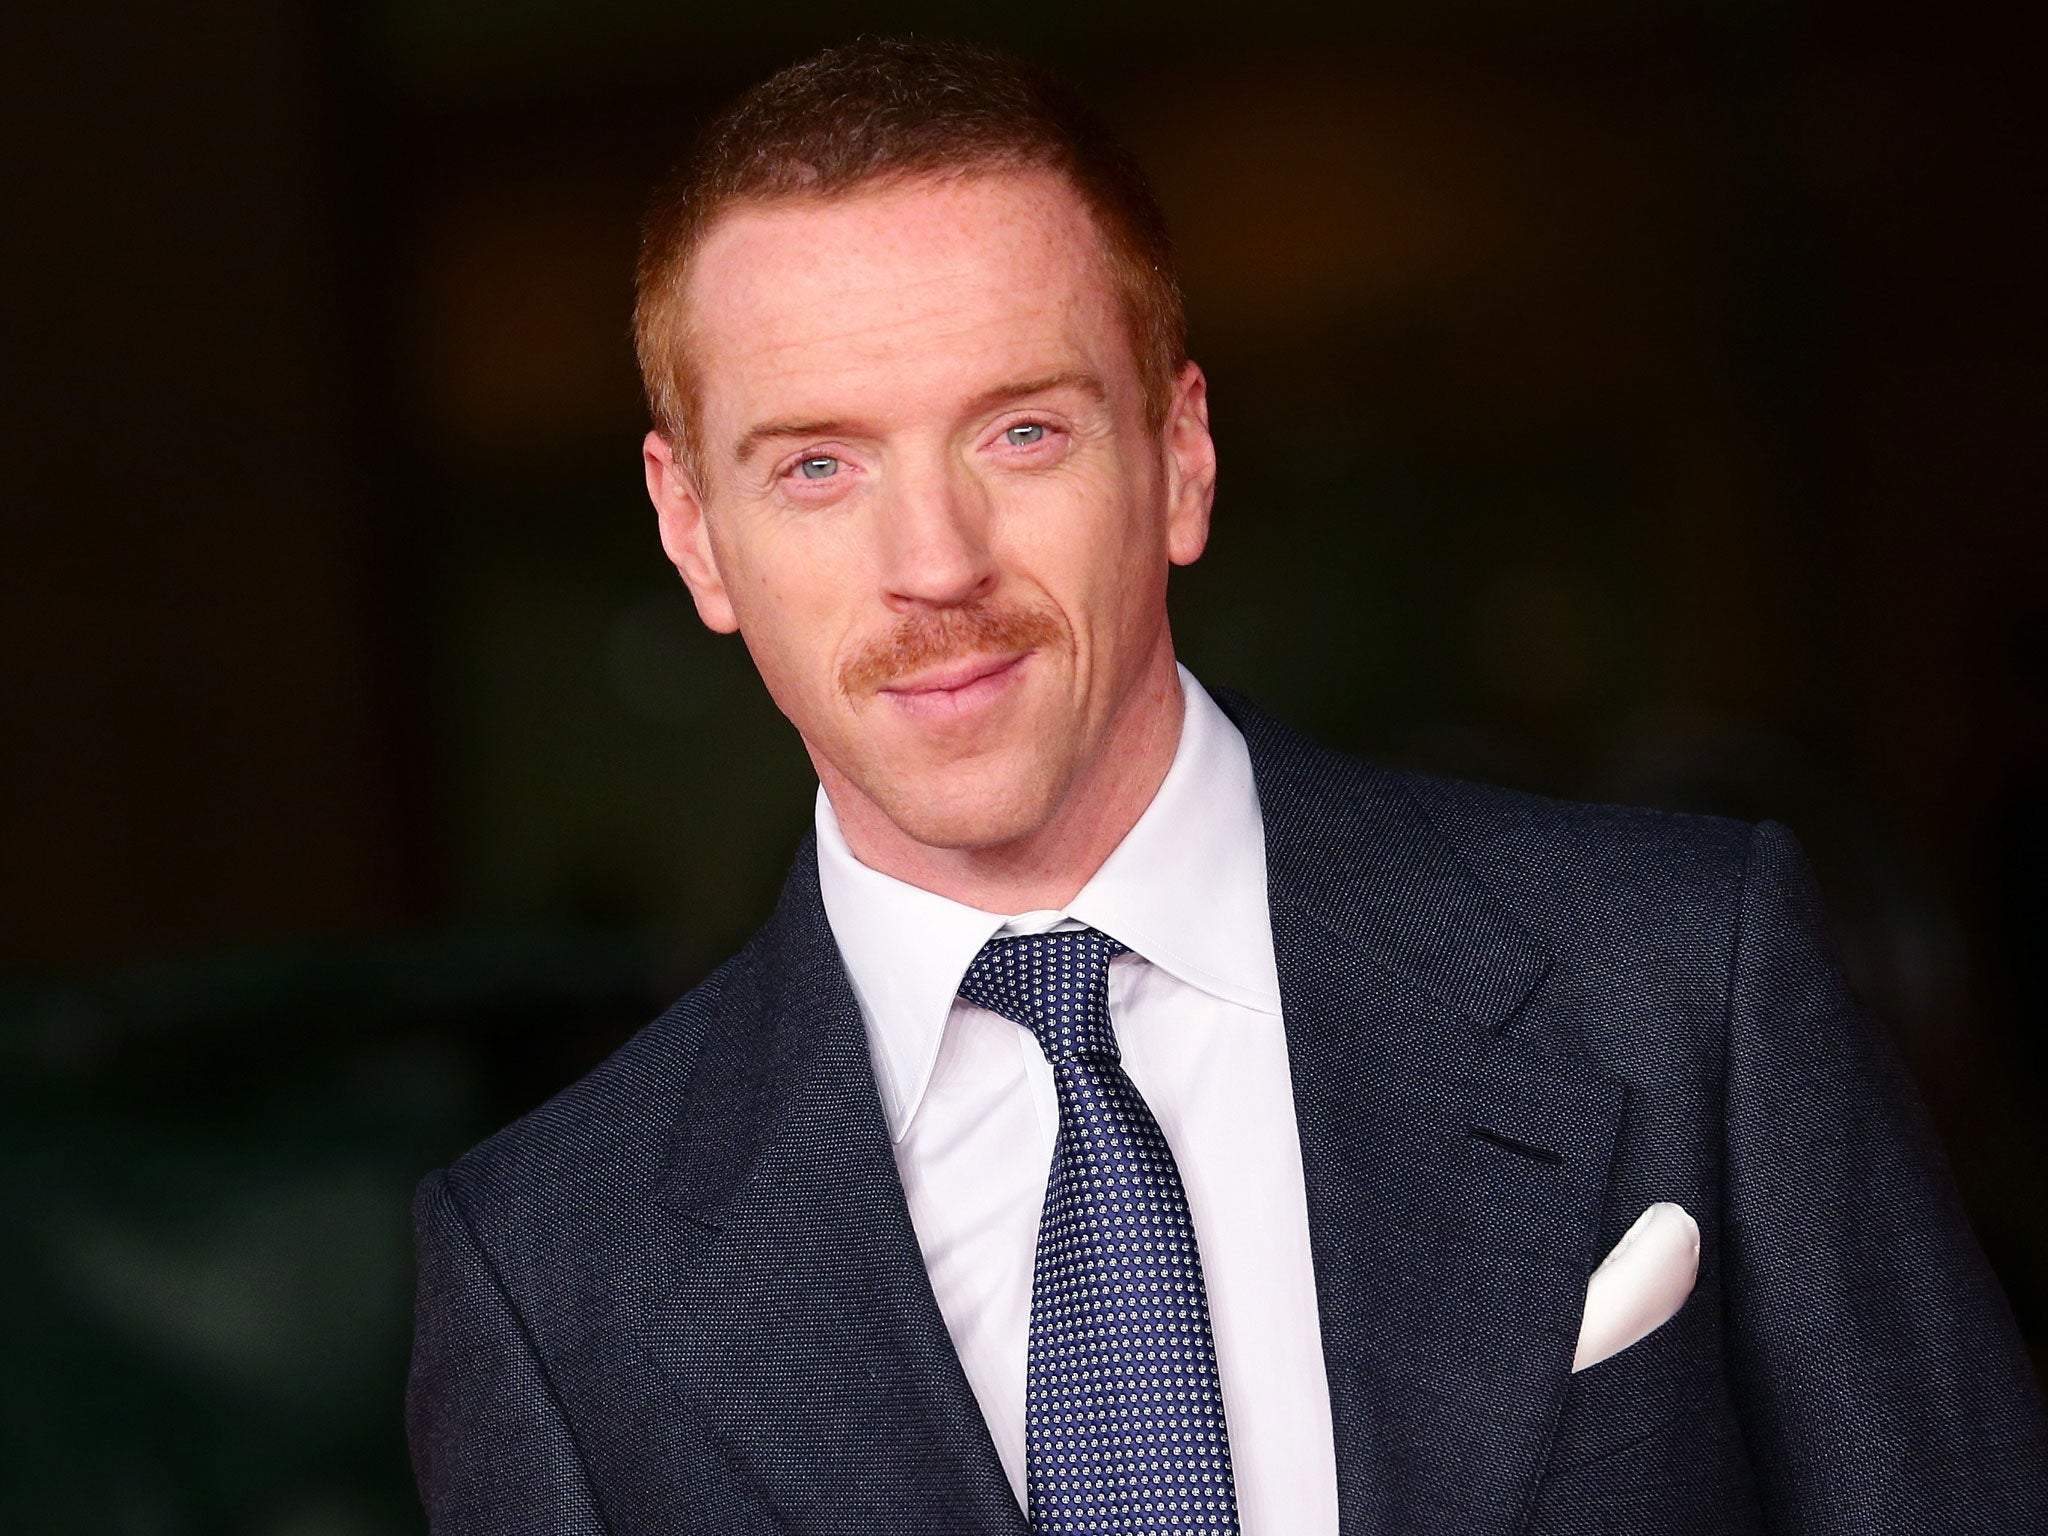 Homeland star Damian Lewis is to play a British Secret Service agent in Susanna White's film adaptation of John le Carre's Our Kind of Traitor